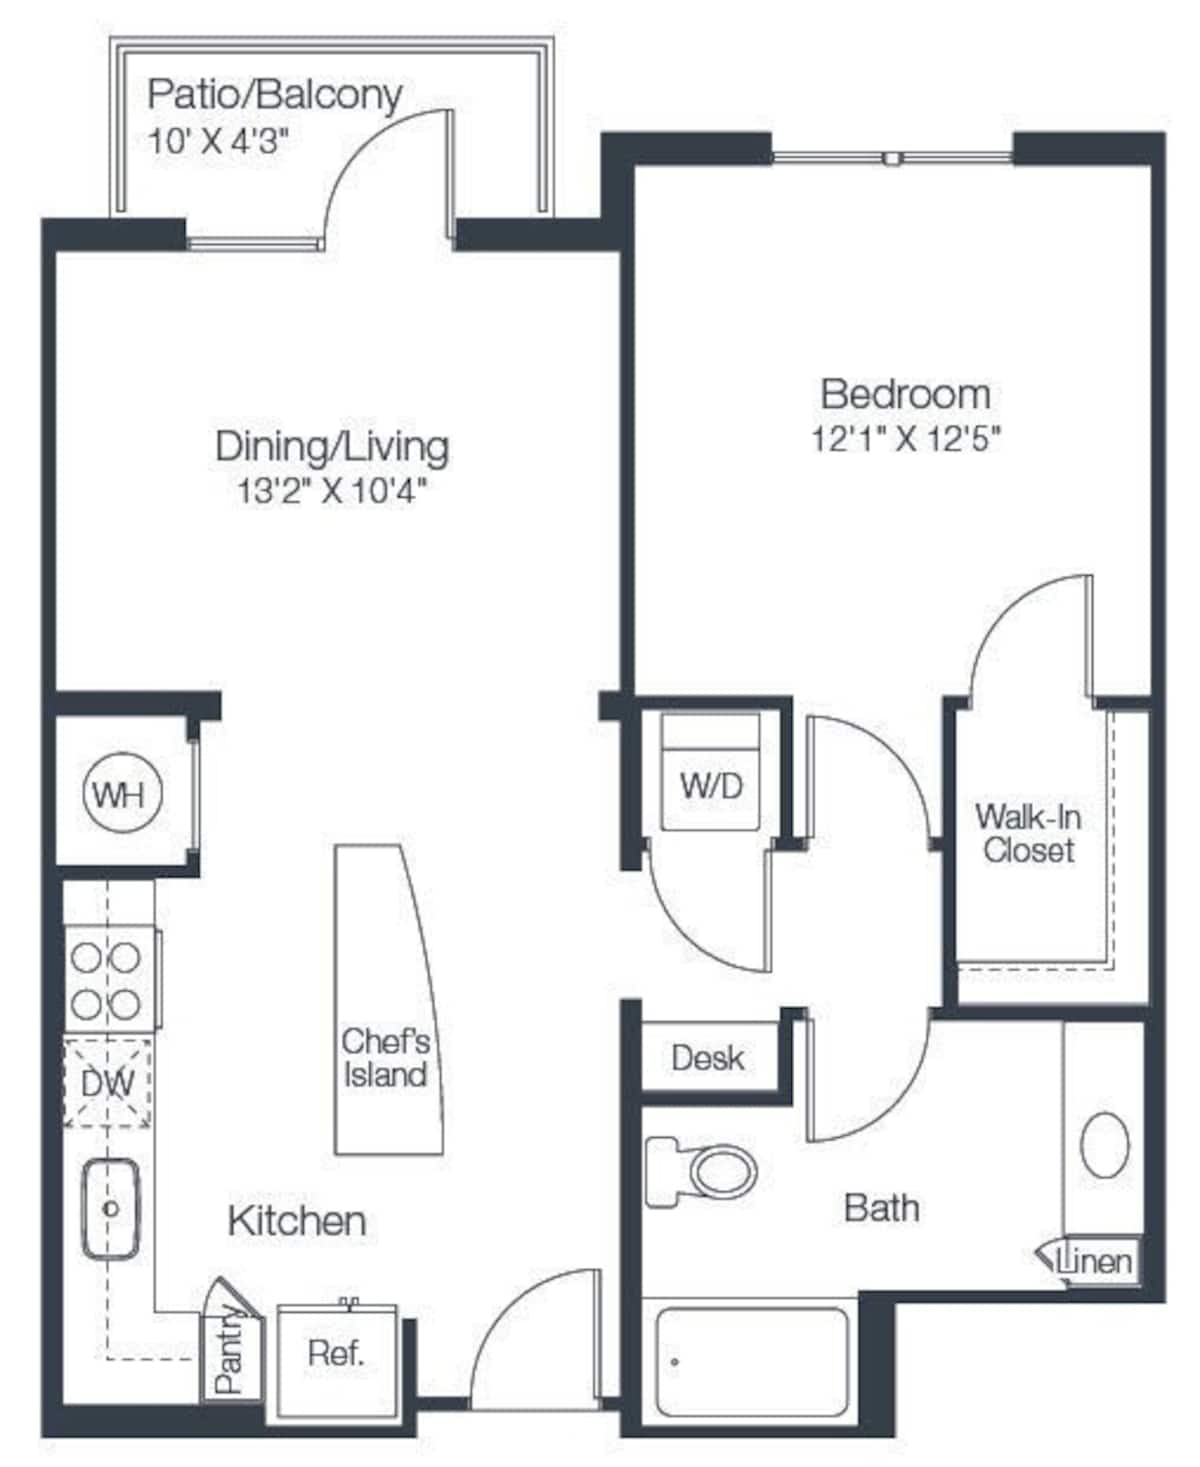 Floorplan diagram for A2e, showing 1 bedroom